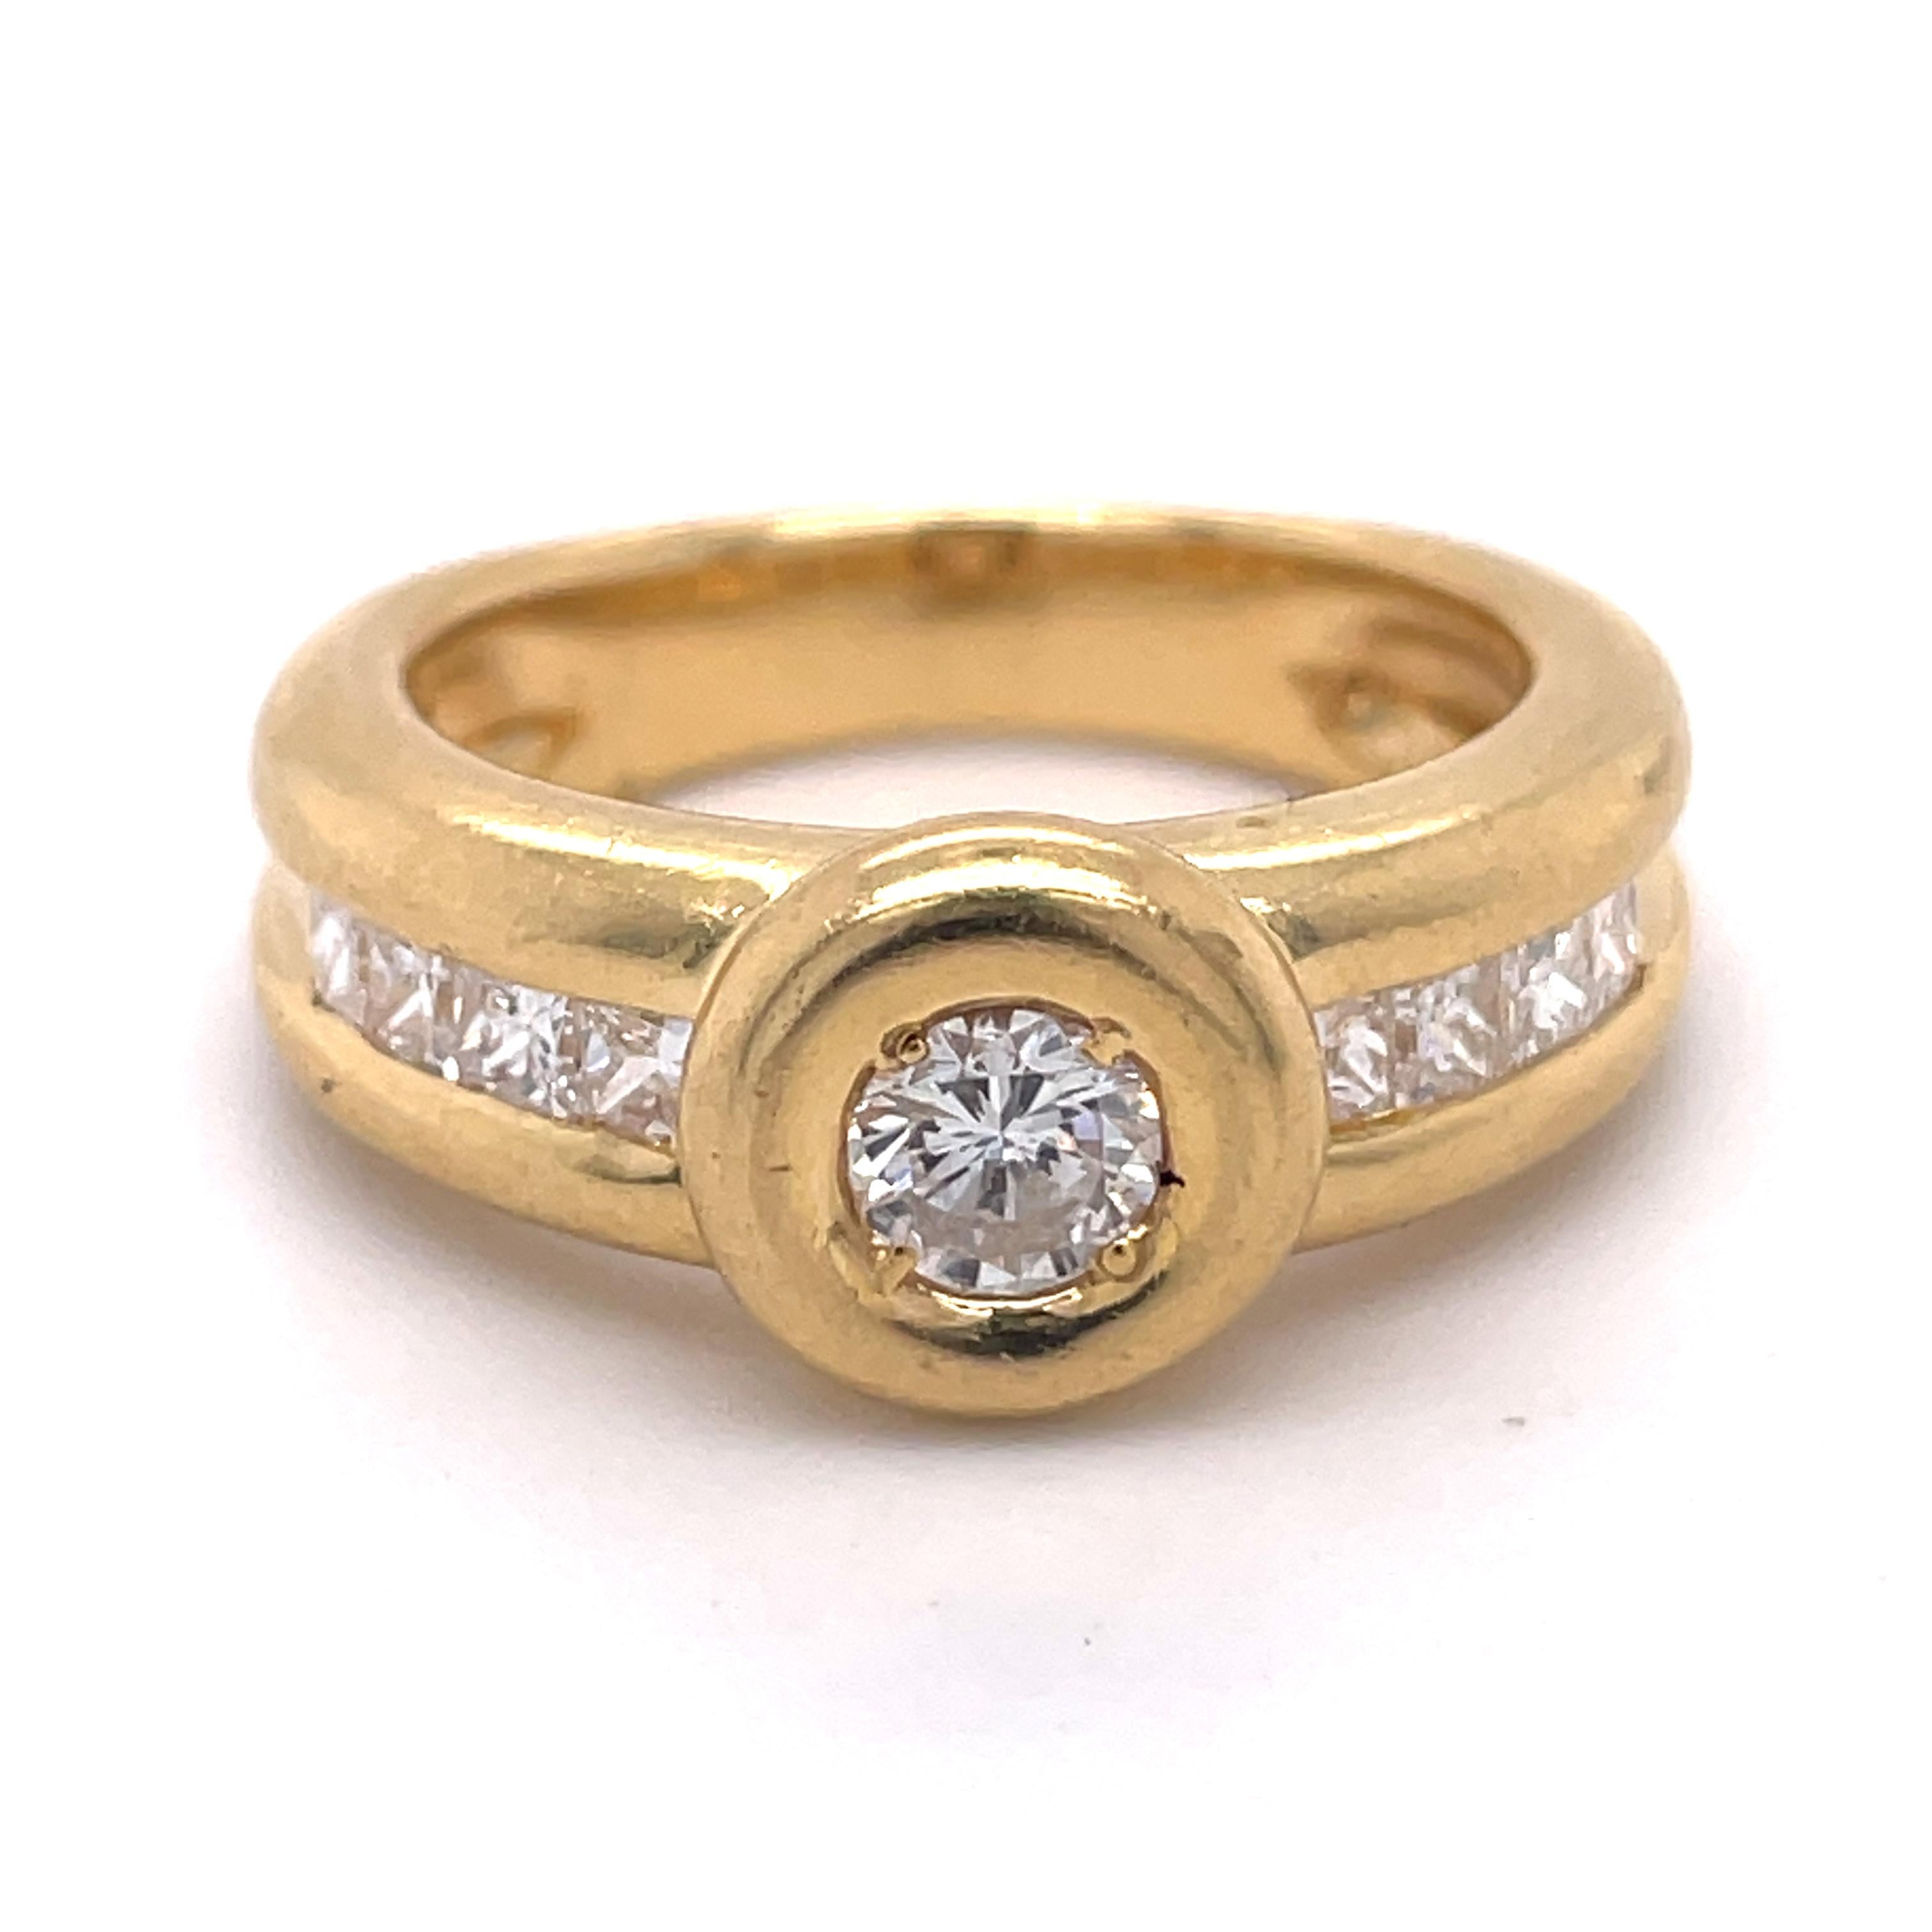 Jewelry Yellow Gold 18k  (the gold has been tested by a professional)
Total Carat Weight: 0.7ct (Approx.)
Total Metal Weight: 8.35 g
Size:5.25 US  / Diameter 15.9 mm (inner diameter)

Grading Results:
Stone Type: Diamond
Shape: Round
Carat: 0.3ct